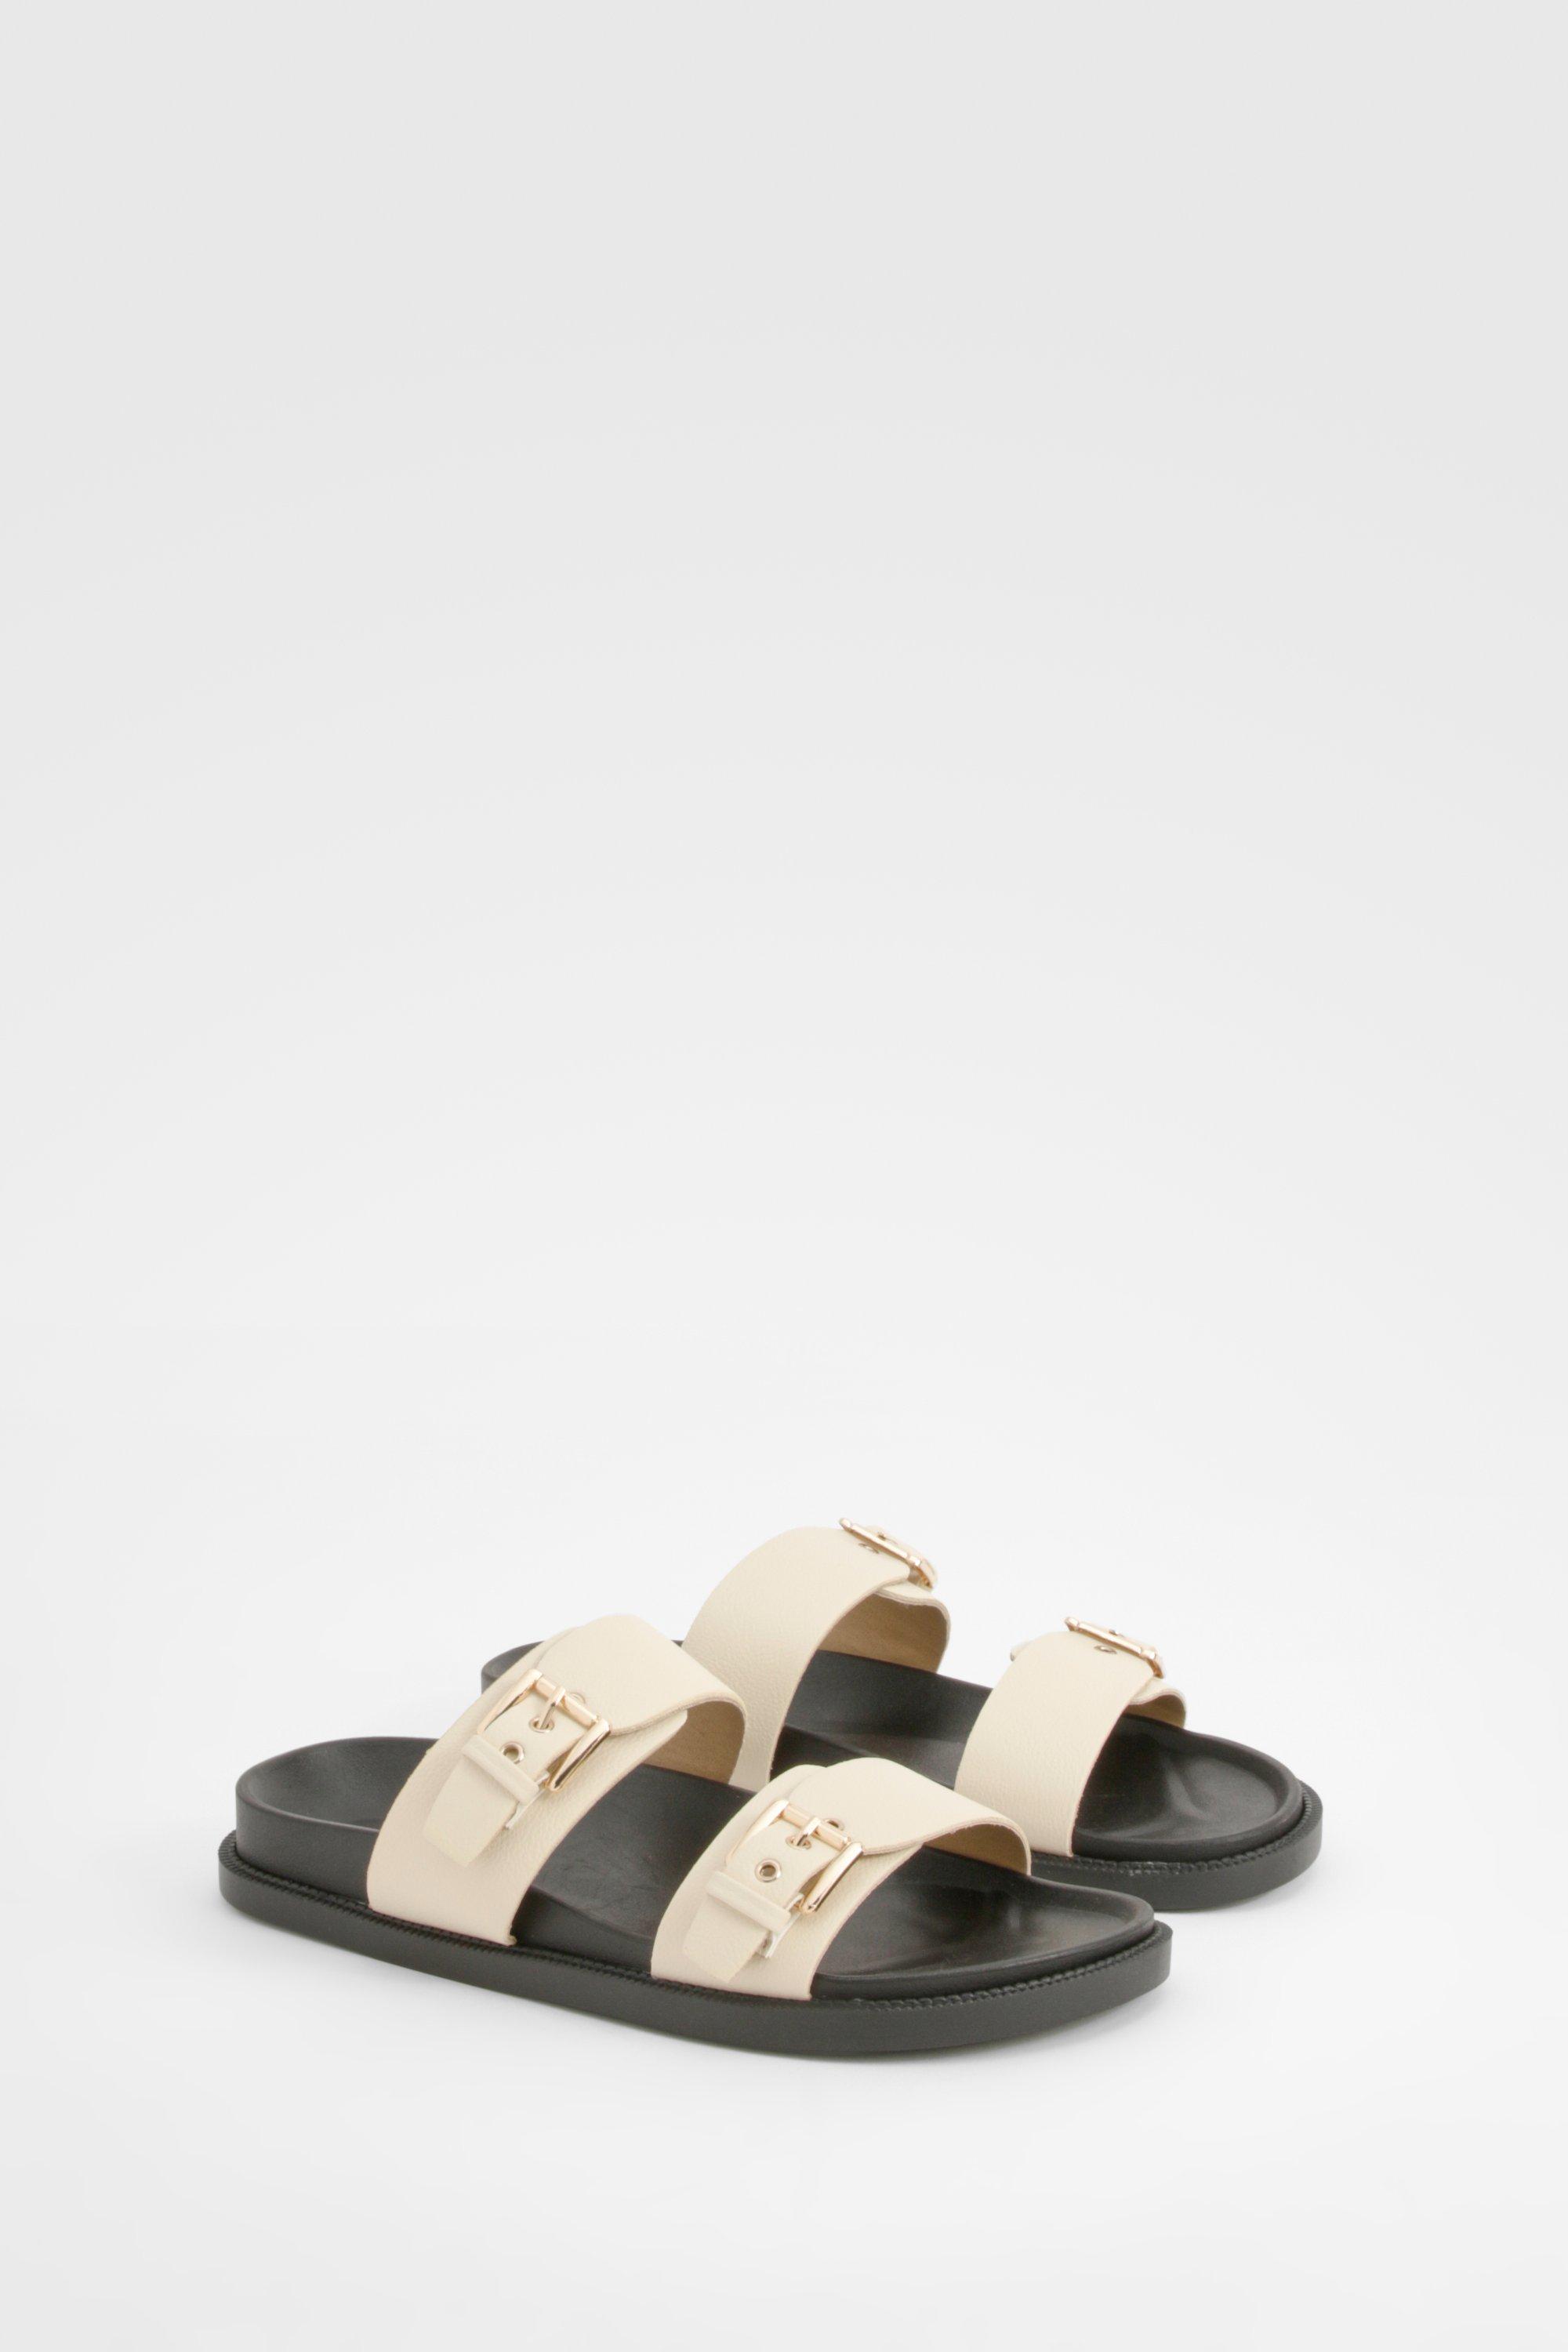 Image of Double Strap Footbed Buckle Sliders, Bianco